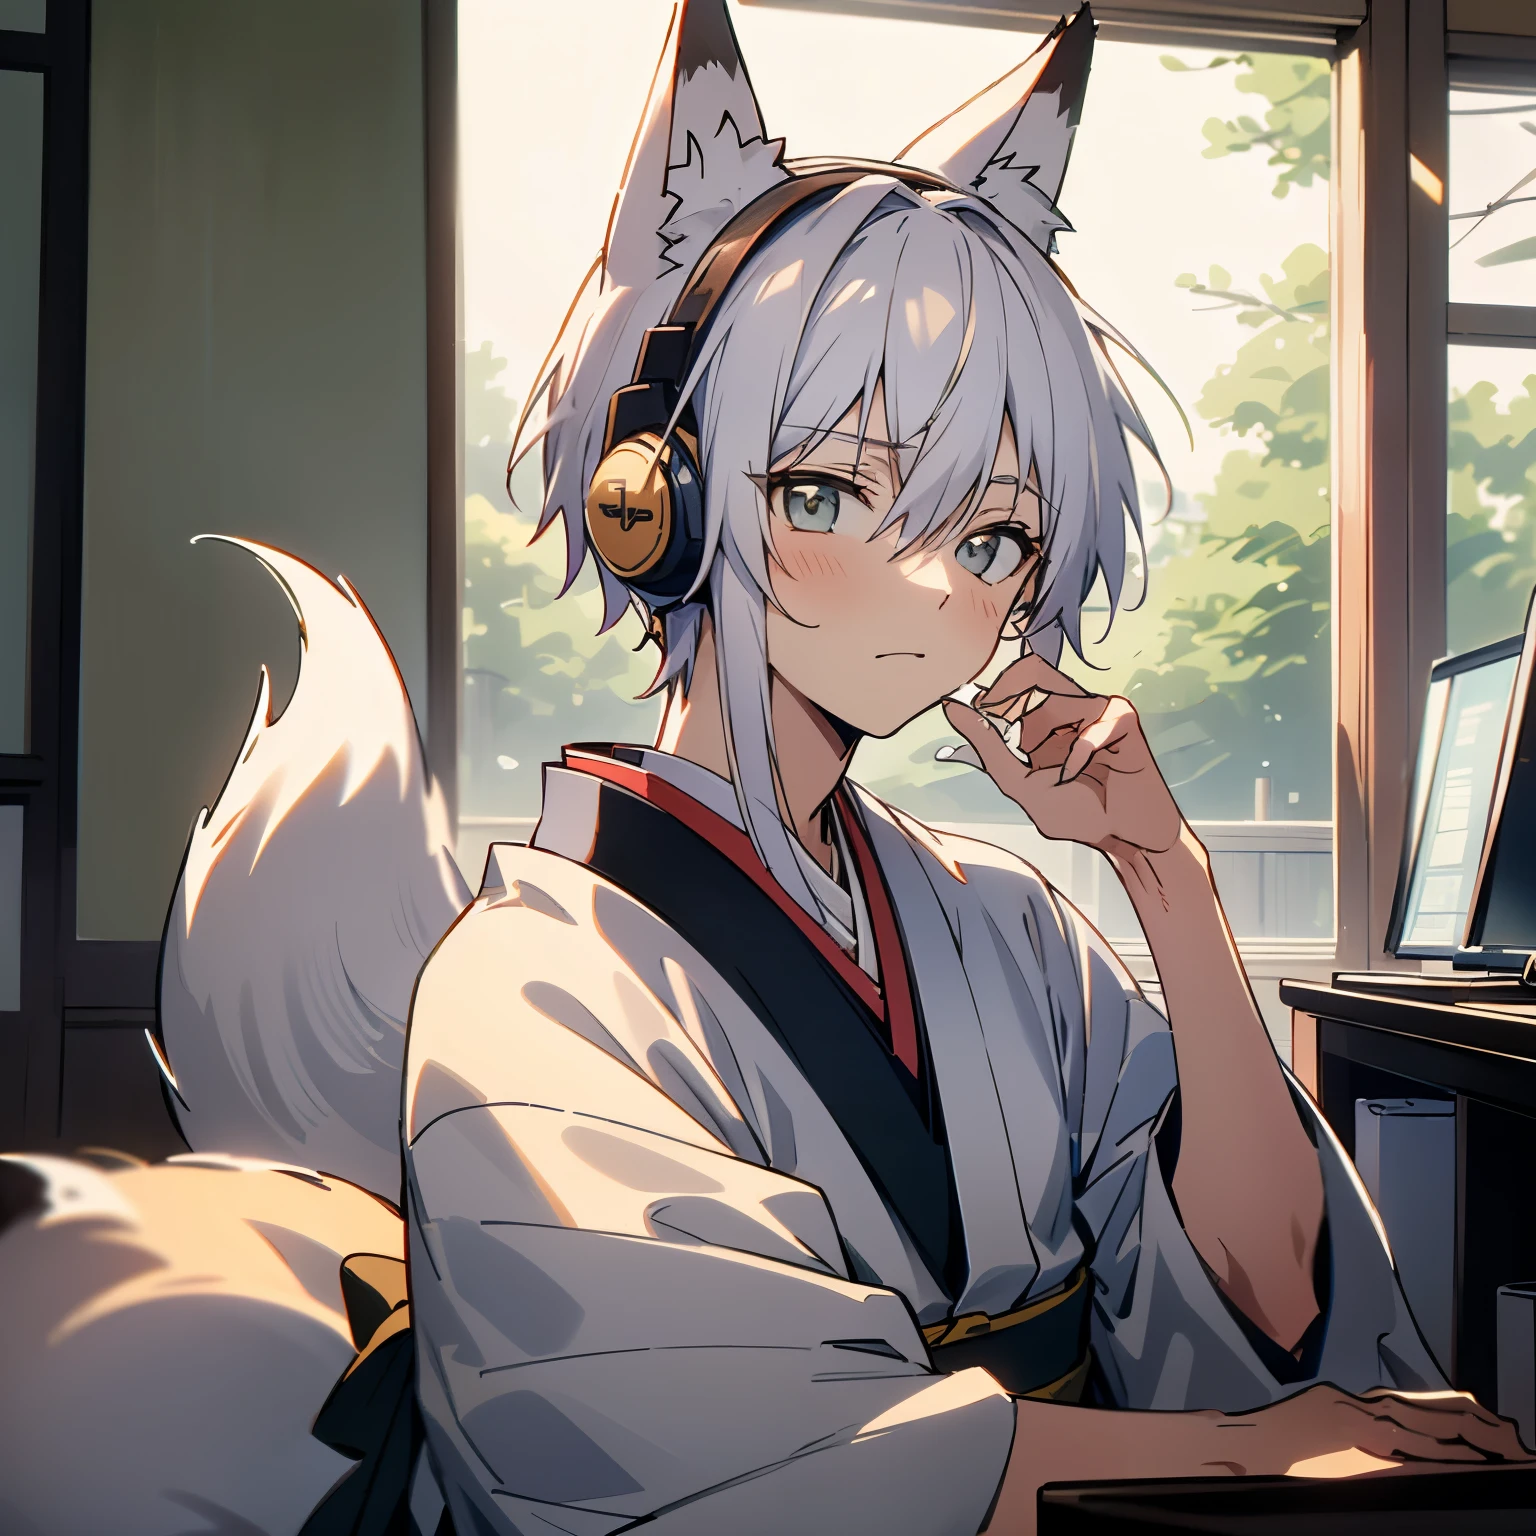 ((best quality)), ((masterpiece)), (detailed), perfect face male、((best quality)), ((masterpiece)), (detailed), perfect face ((highest quality)), ((masterpiece)), (be familiar with),、morning、A boy studying in his room while listening to the radio with headphones、kimono、Silver Hair、Fox&#39;s Tail、Fox Ears、Warm lighting、Cherry blossoms are blooming outside the room、opening the computer、Japanese anime style,
